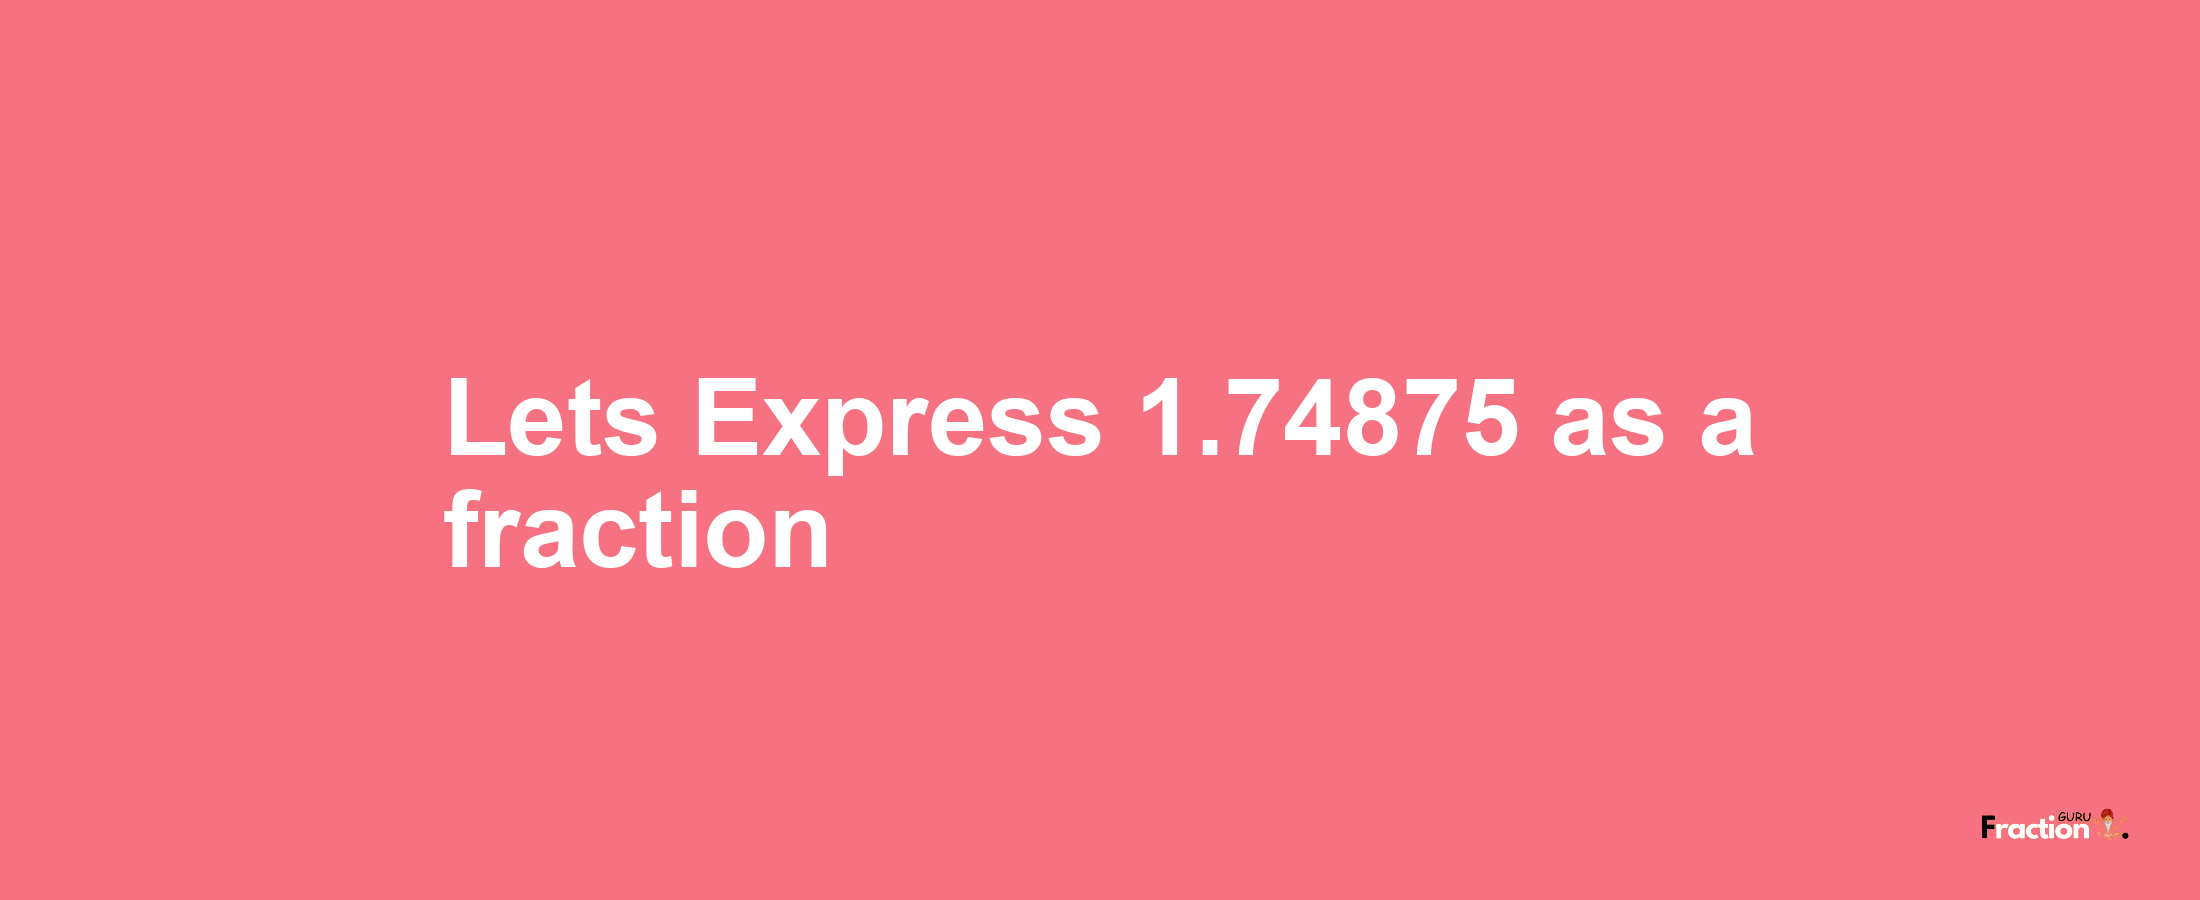 Lets Express 1.74875 as afraction